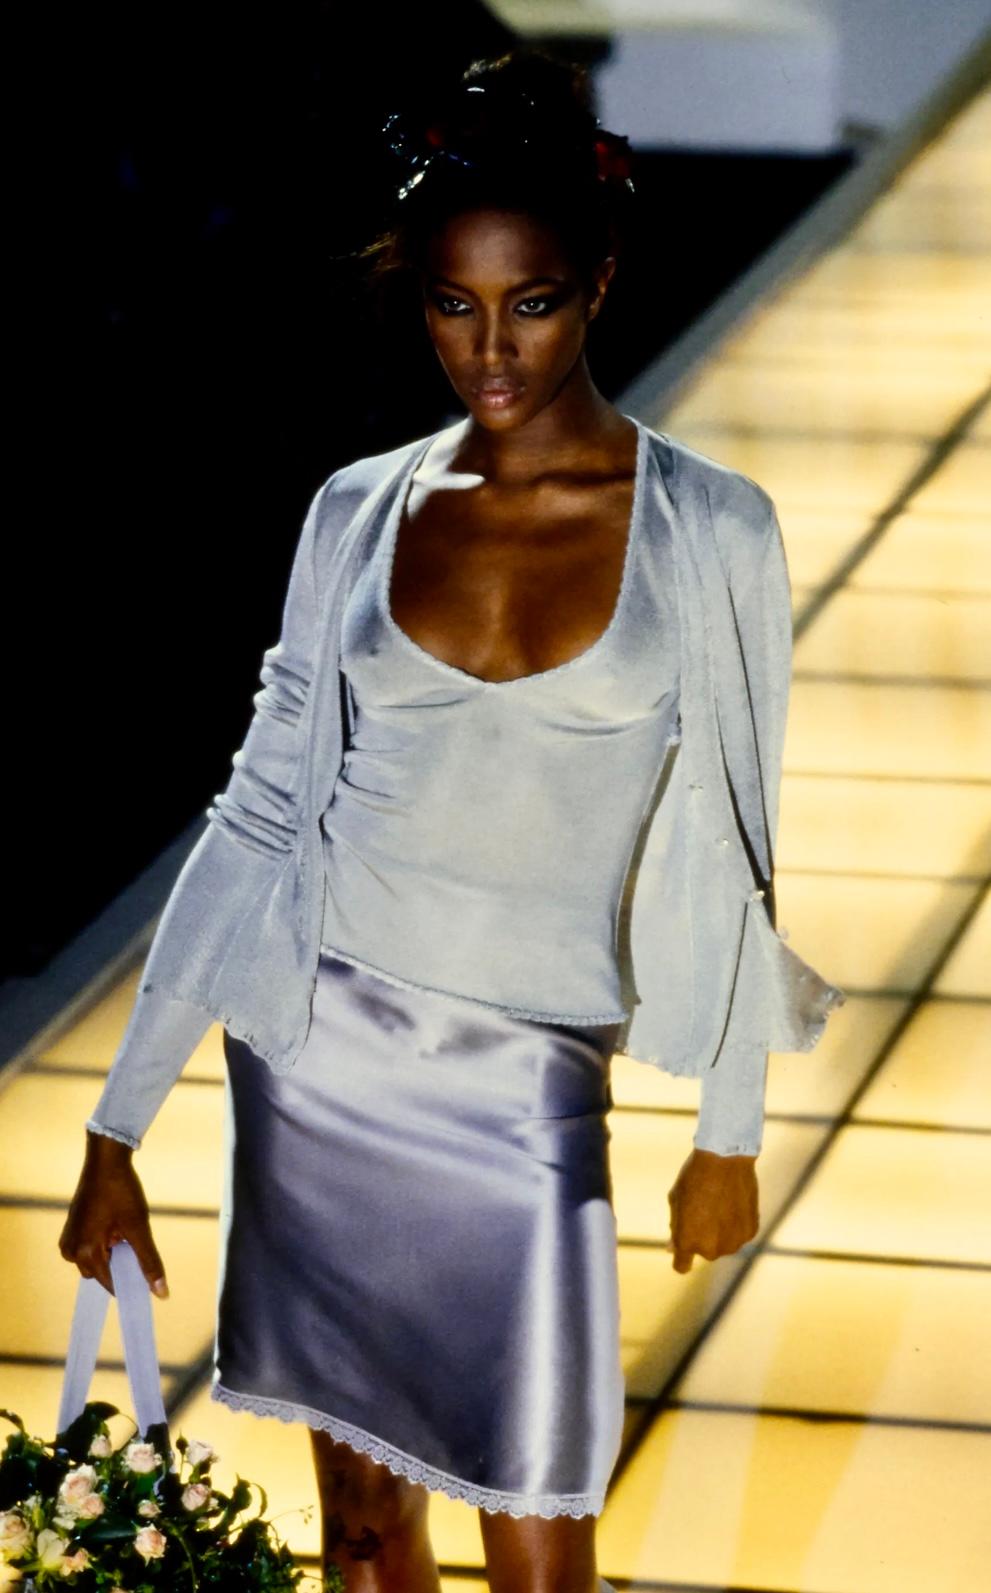 From the Spring/Summer 1997 collection, this Gianni Versace knit top debuted on the season's runway as part of look 32 in gray on Naomi Campbell. The matching black cardigan as seen on the runway is also available for purchase!  This top features a